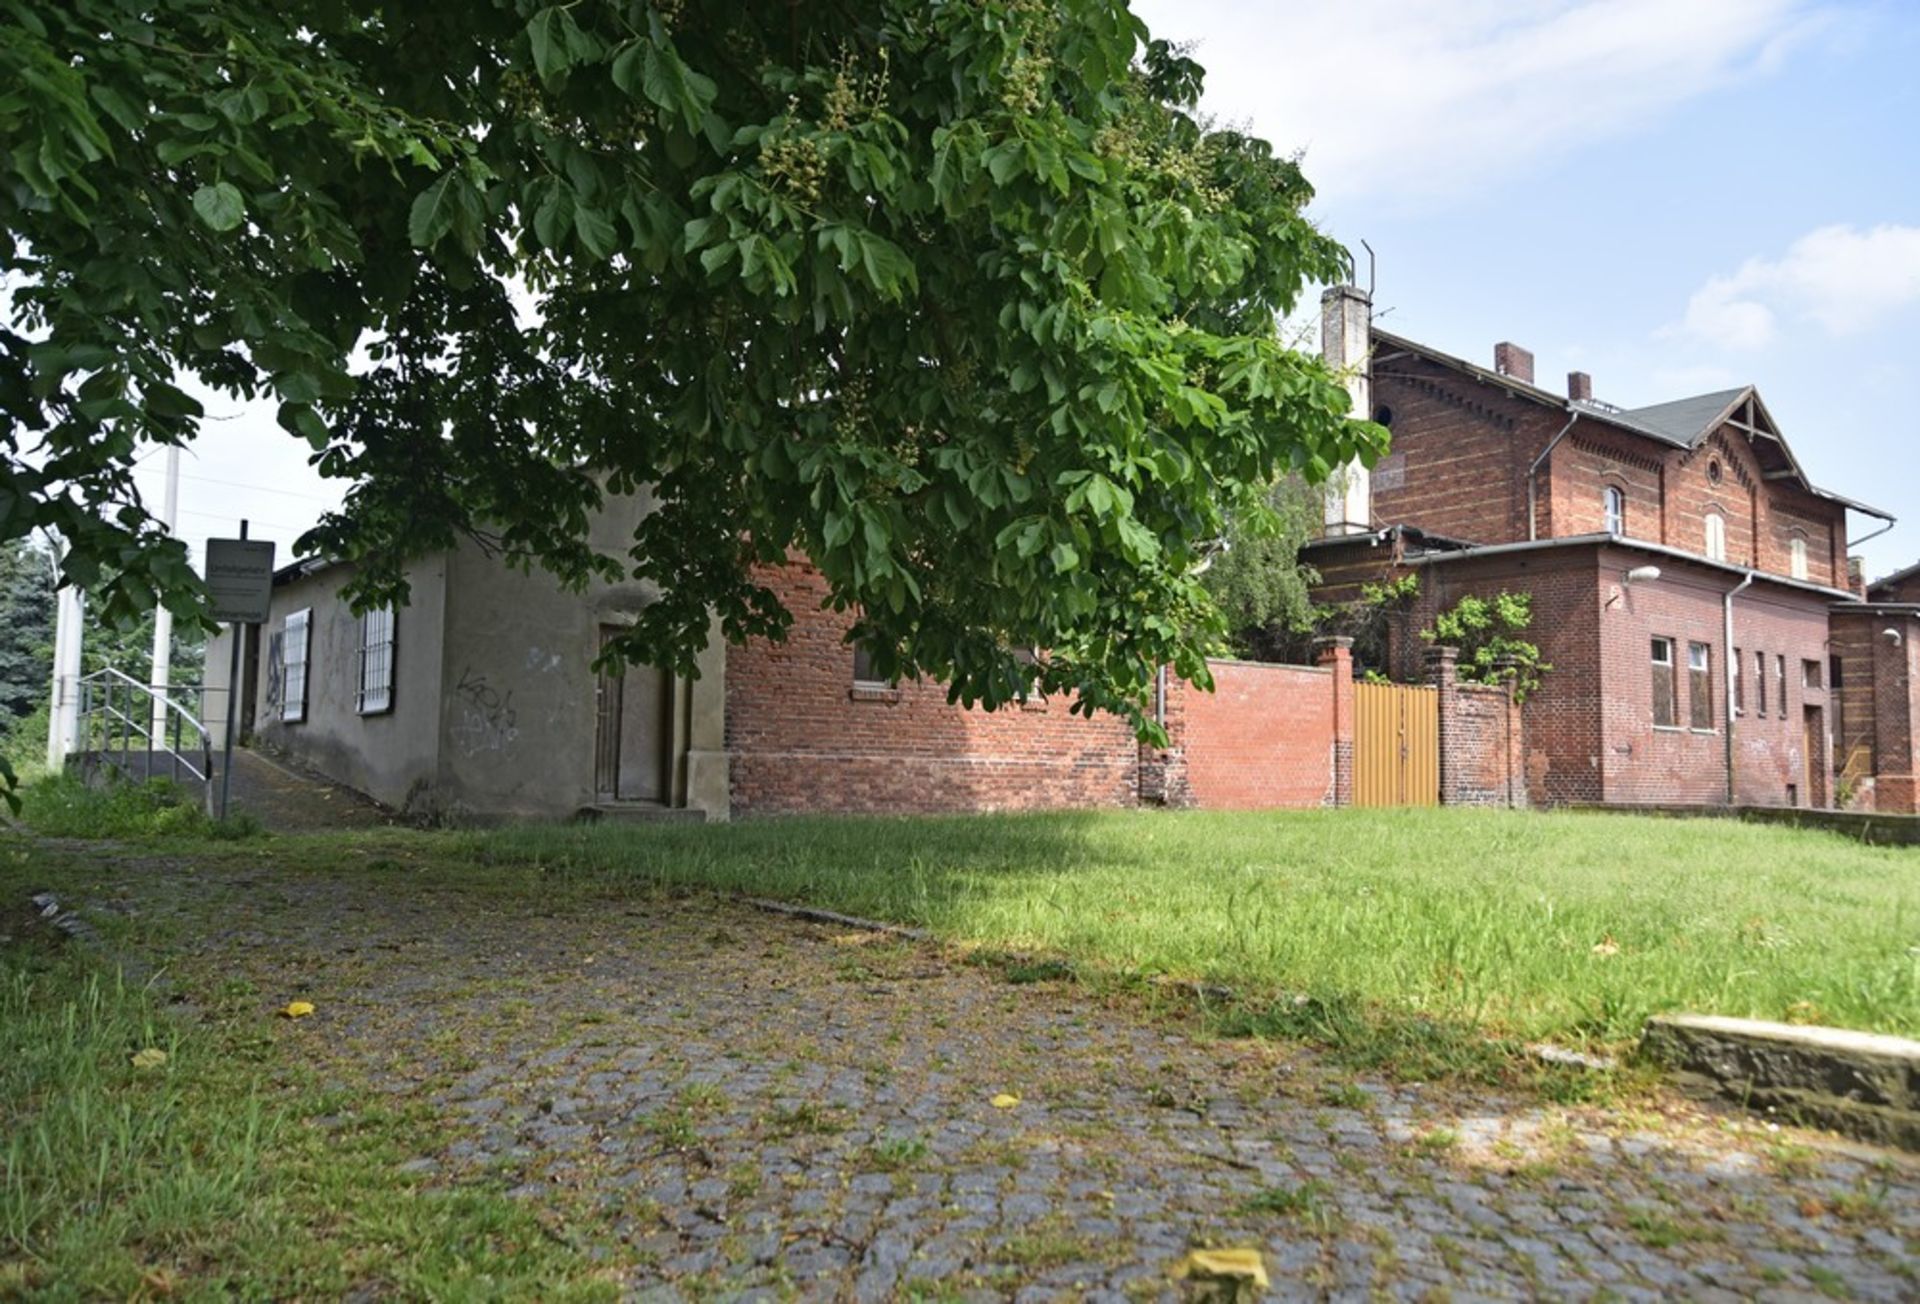 STATION HOUSE, GOODS SHED, OVER ONE ACRE Tangerhütte, Saxony, Germany, - Image 7 of 98